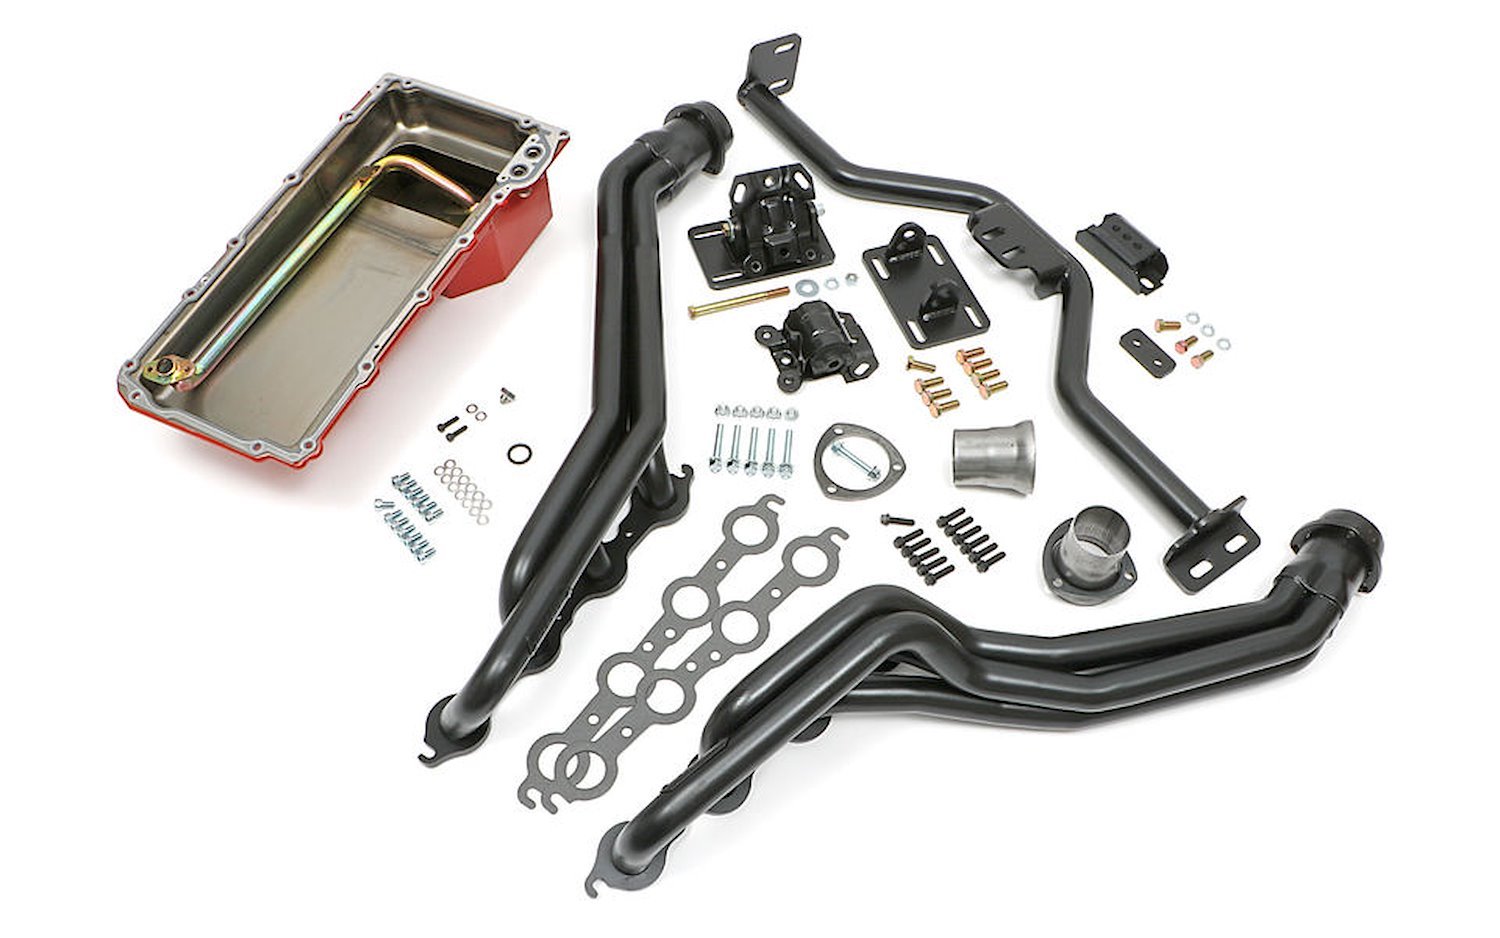 42163 Engine Swap-In-A-Box Kit for GM LS (Gen III/IV) Engine and 4L60E/70E Transmission, 1982-2004 GM S10/S15/Blazer 2WD